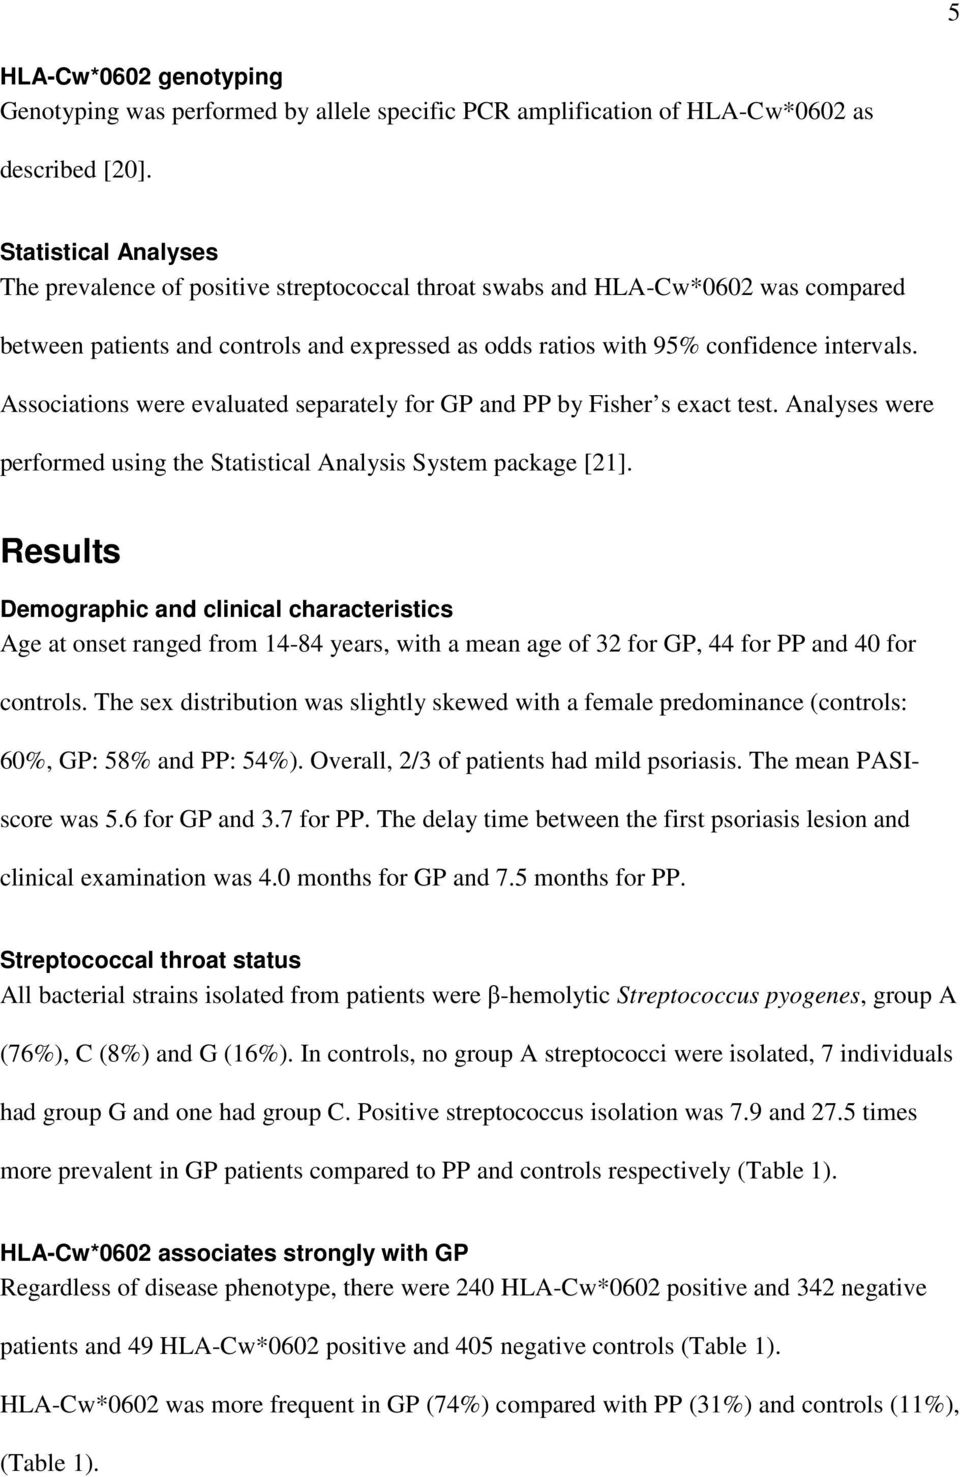 Associations were evaluated separately for GP and PP by Fisher s exact test. Analyses were performed using the Statistical Analysis System package [21].